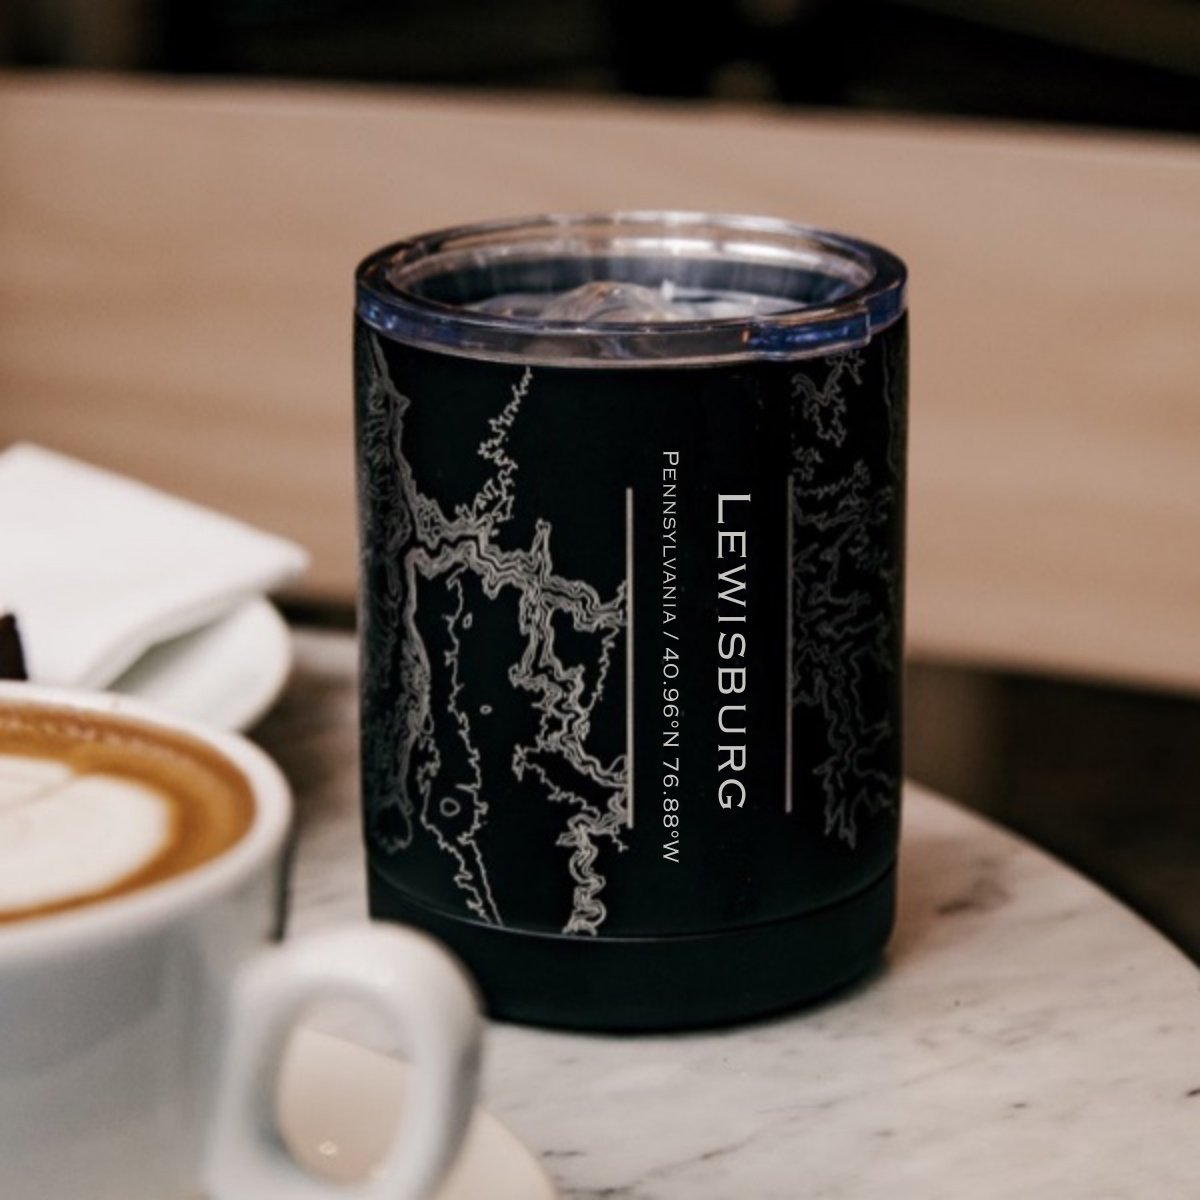 Lewisburg - Pennsylvania Engraved Map Insulated Cup in Matte Black | Cyan Castor